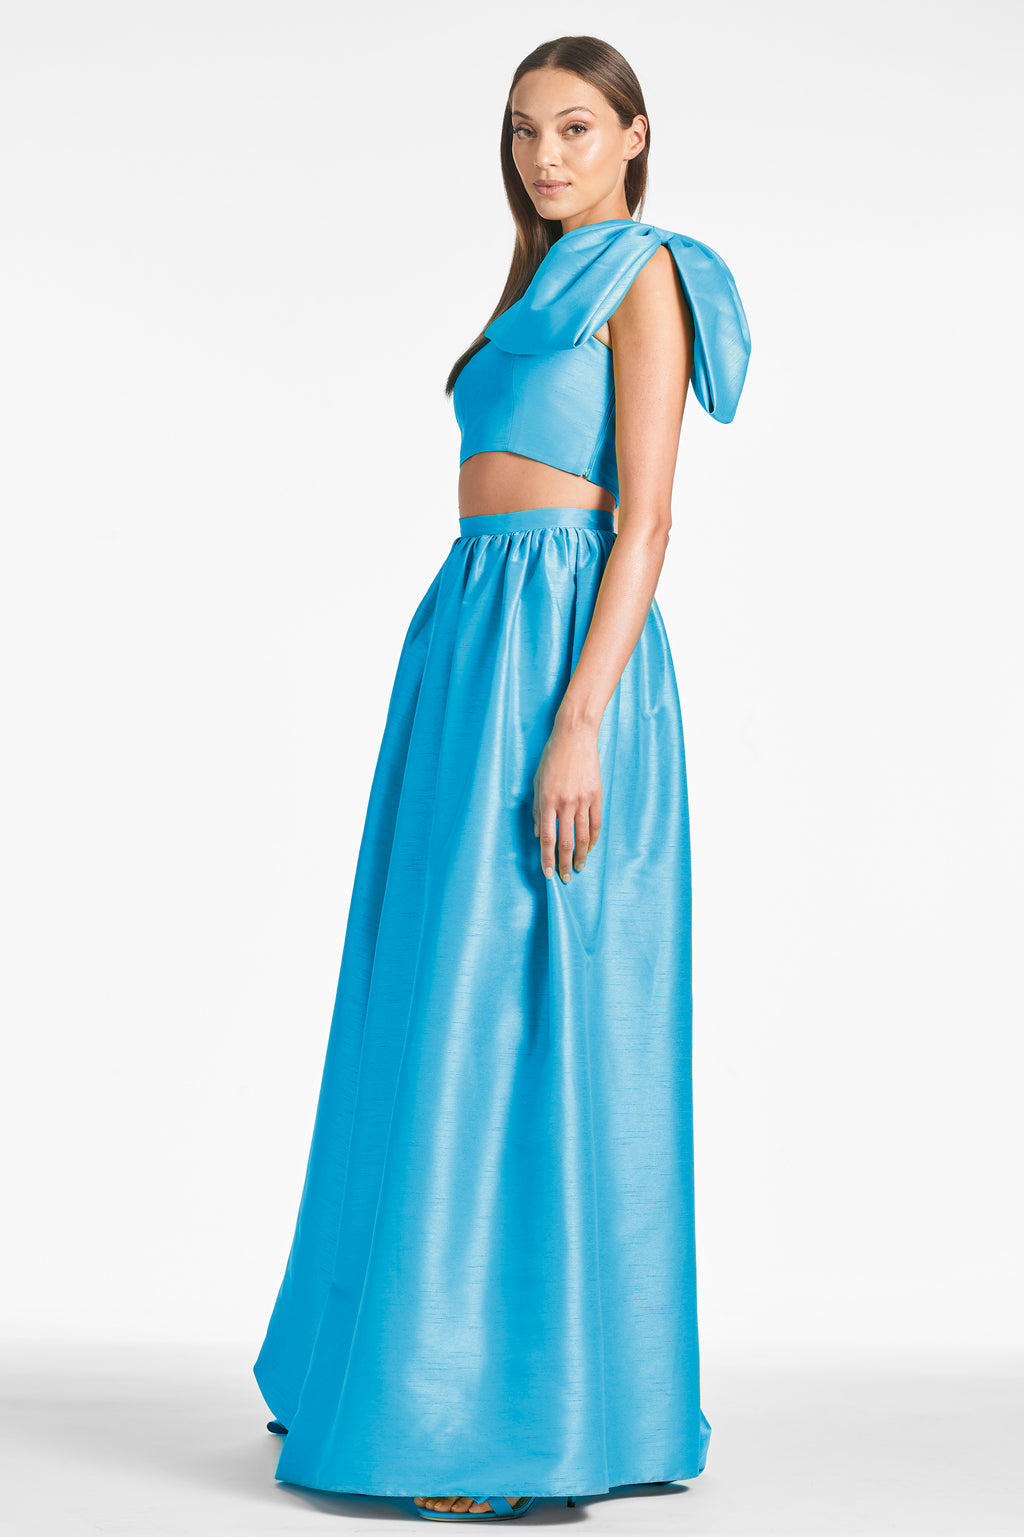 Buy Blue Chiffon Mirror Work Cape with Skirt and Bralette by